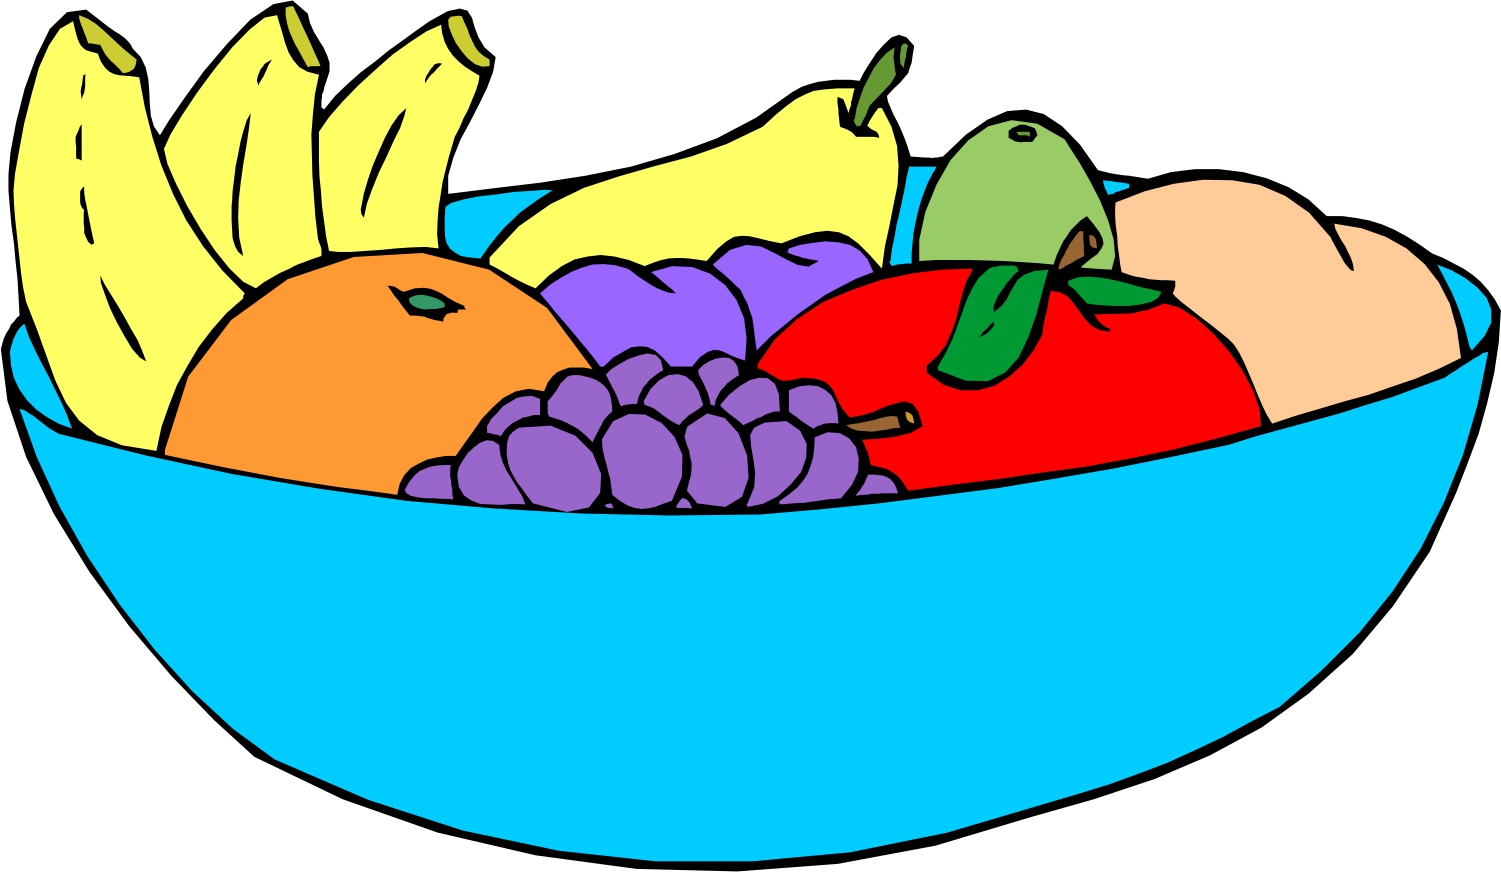 Fruit clip art free free clipart images 2 - Cliparting.com